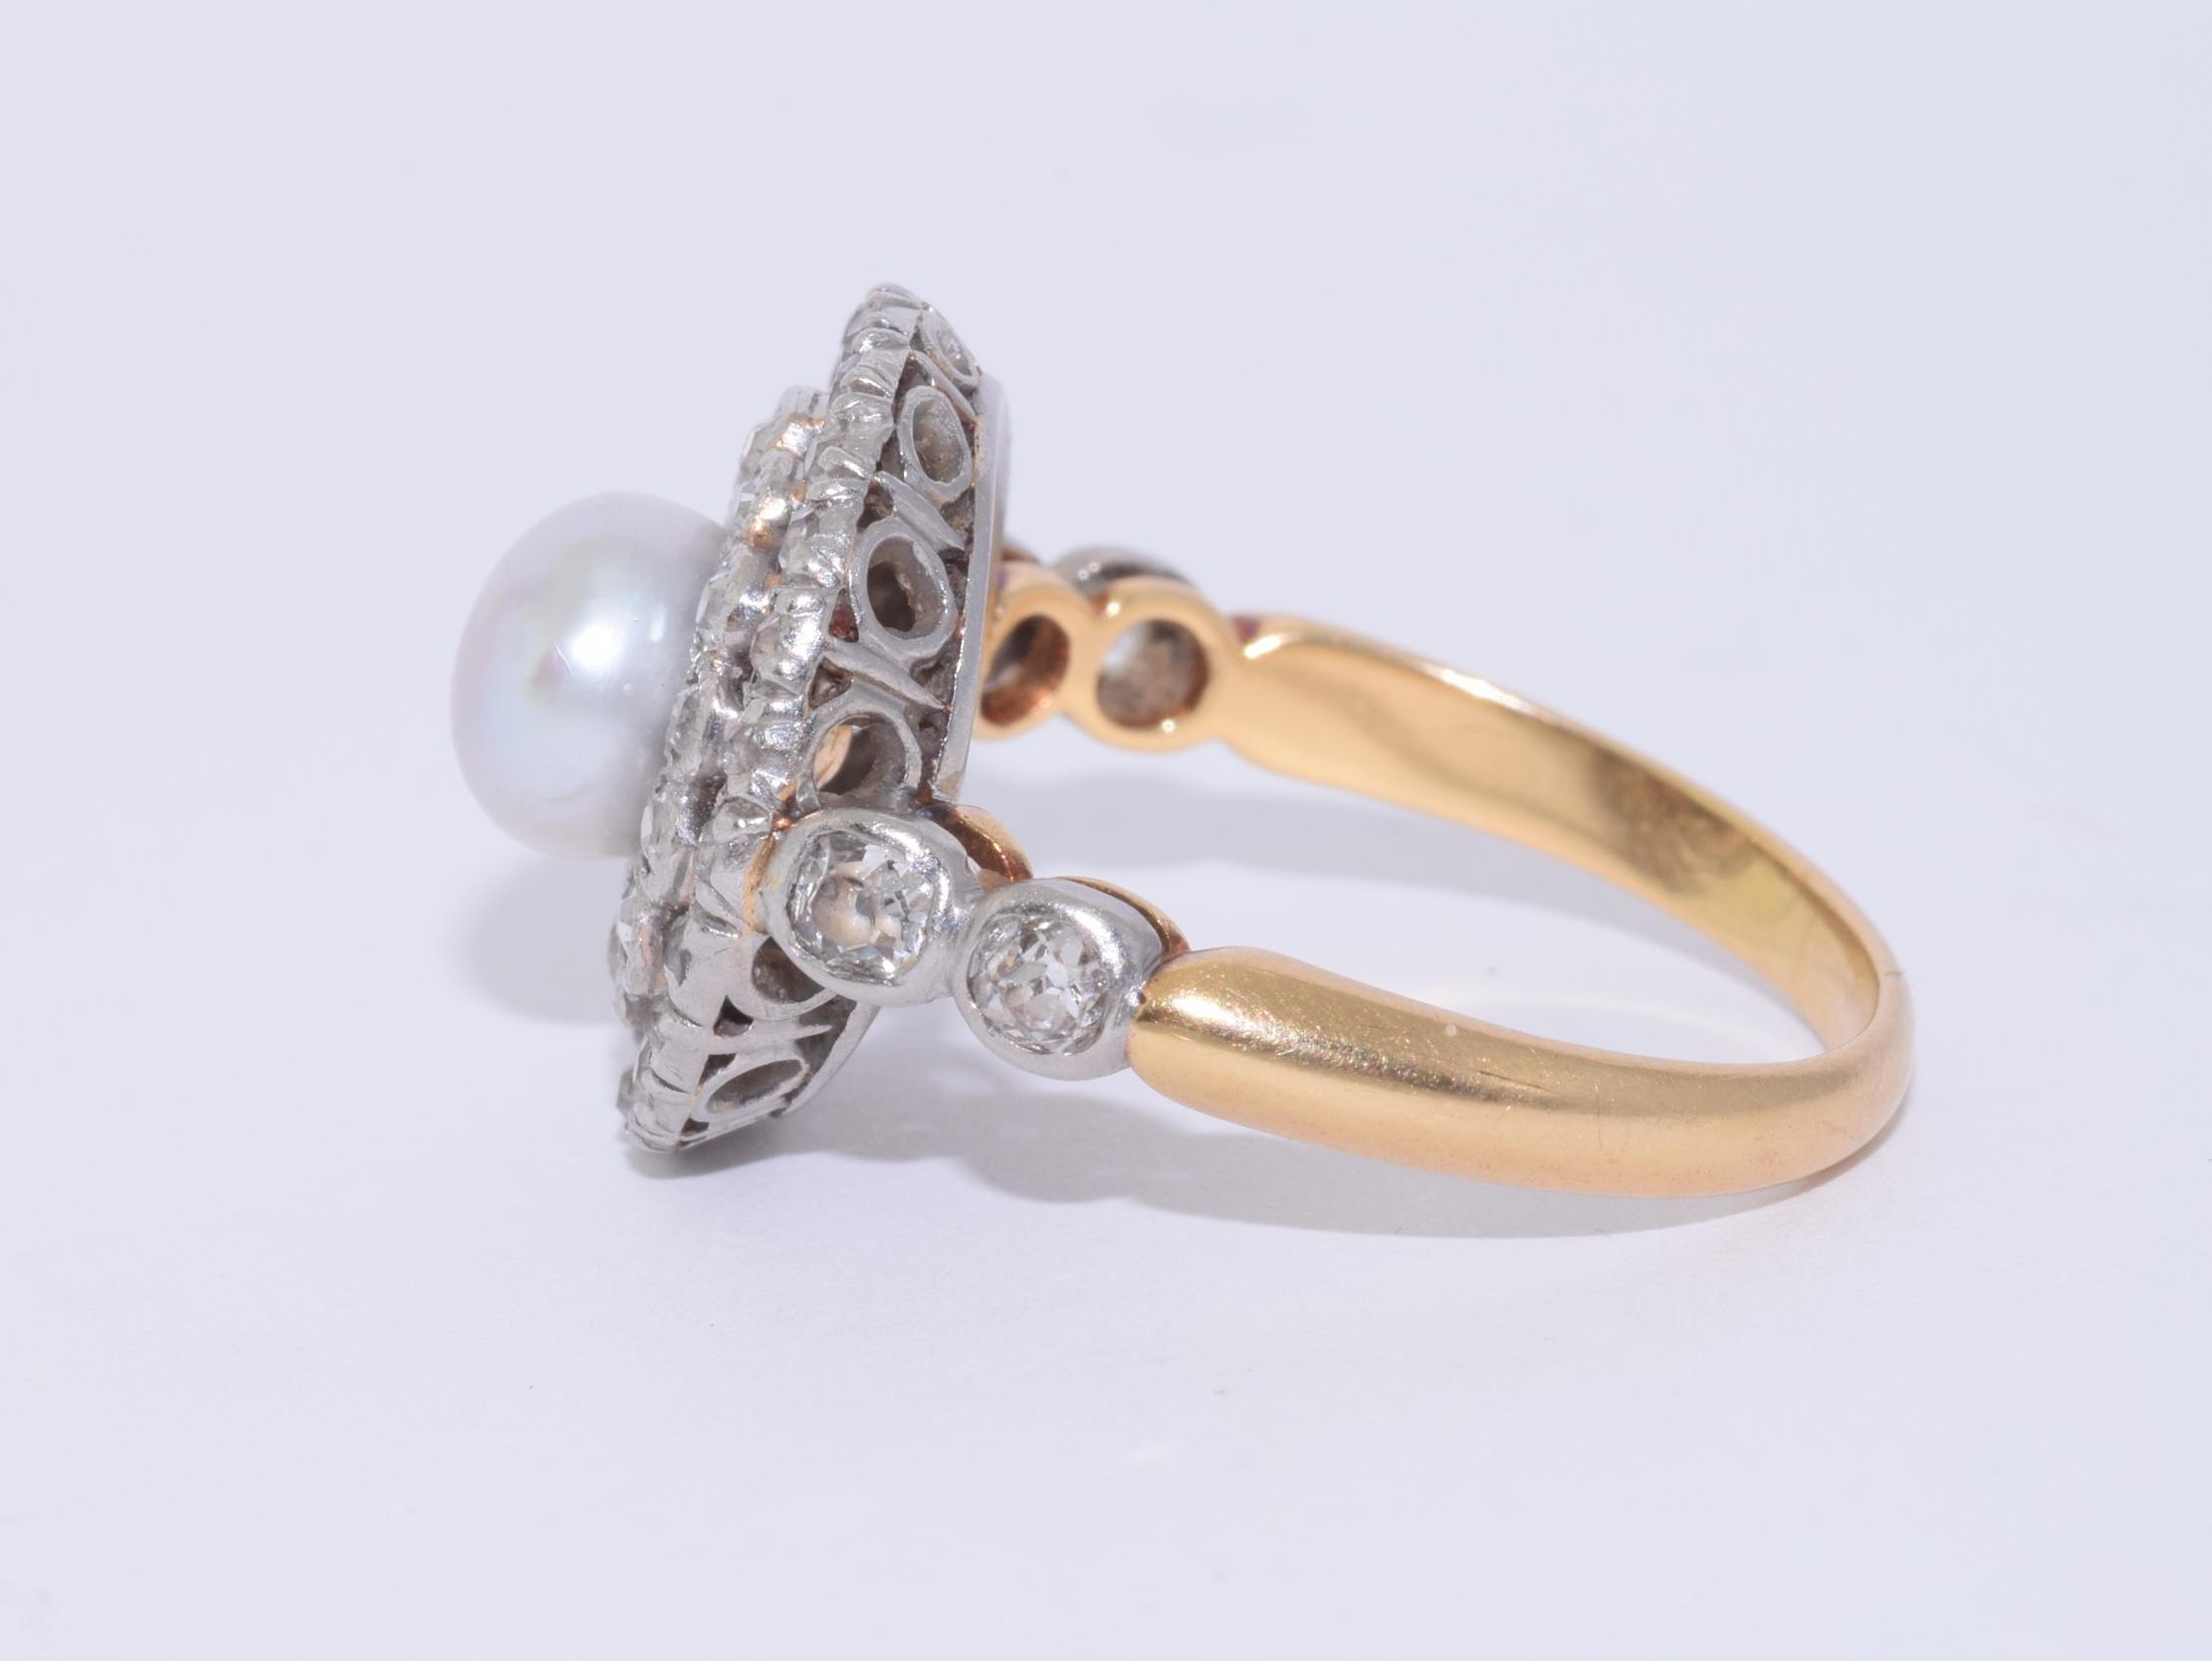 A button pearl measuring approximately 6.5mm is set to the center of a double halo set with old mine diamonds totaling approximately 1.20 carats mounted in platinum topped yellow gold. Circa 1900.

The head of ring measures approximately 15.5mm in